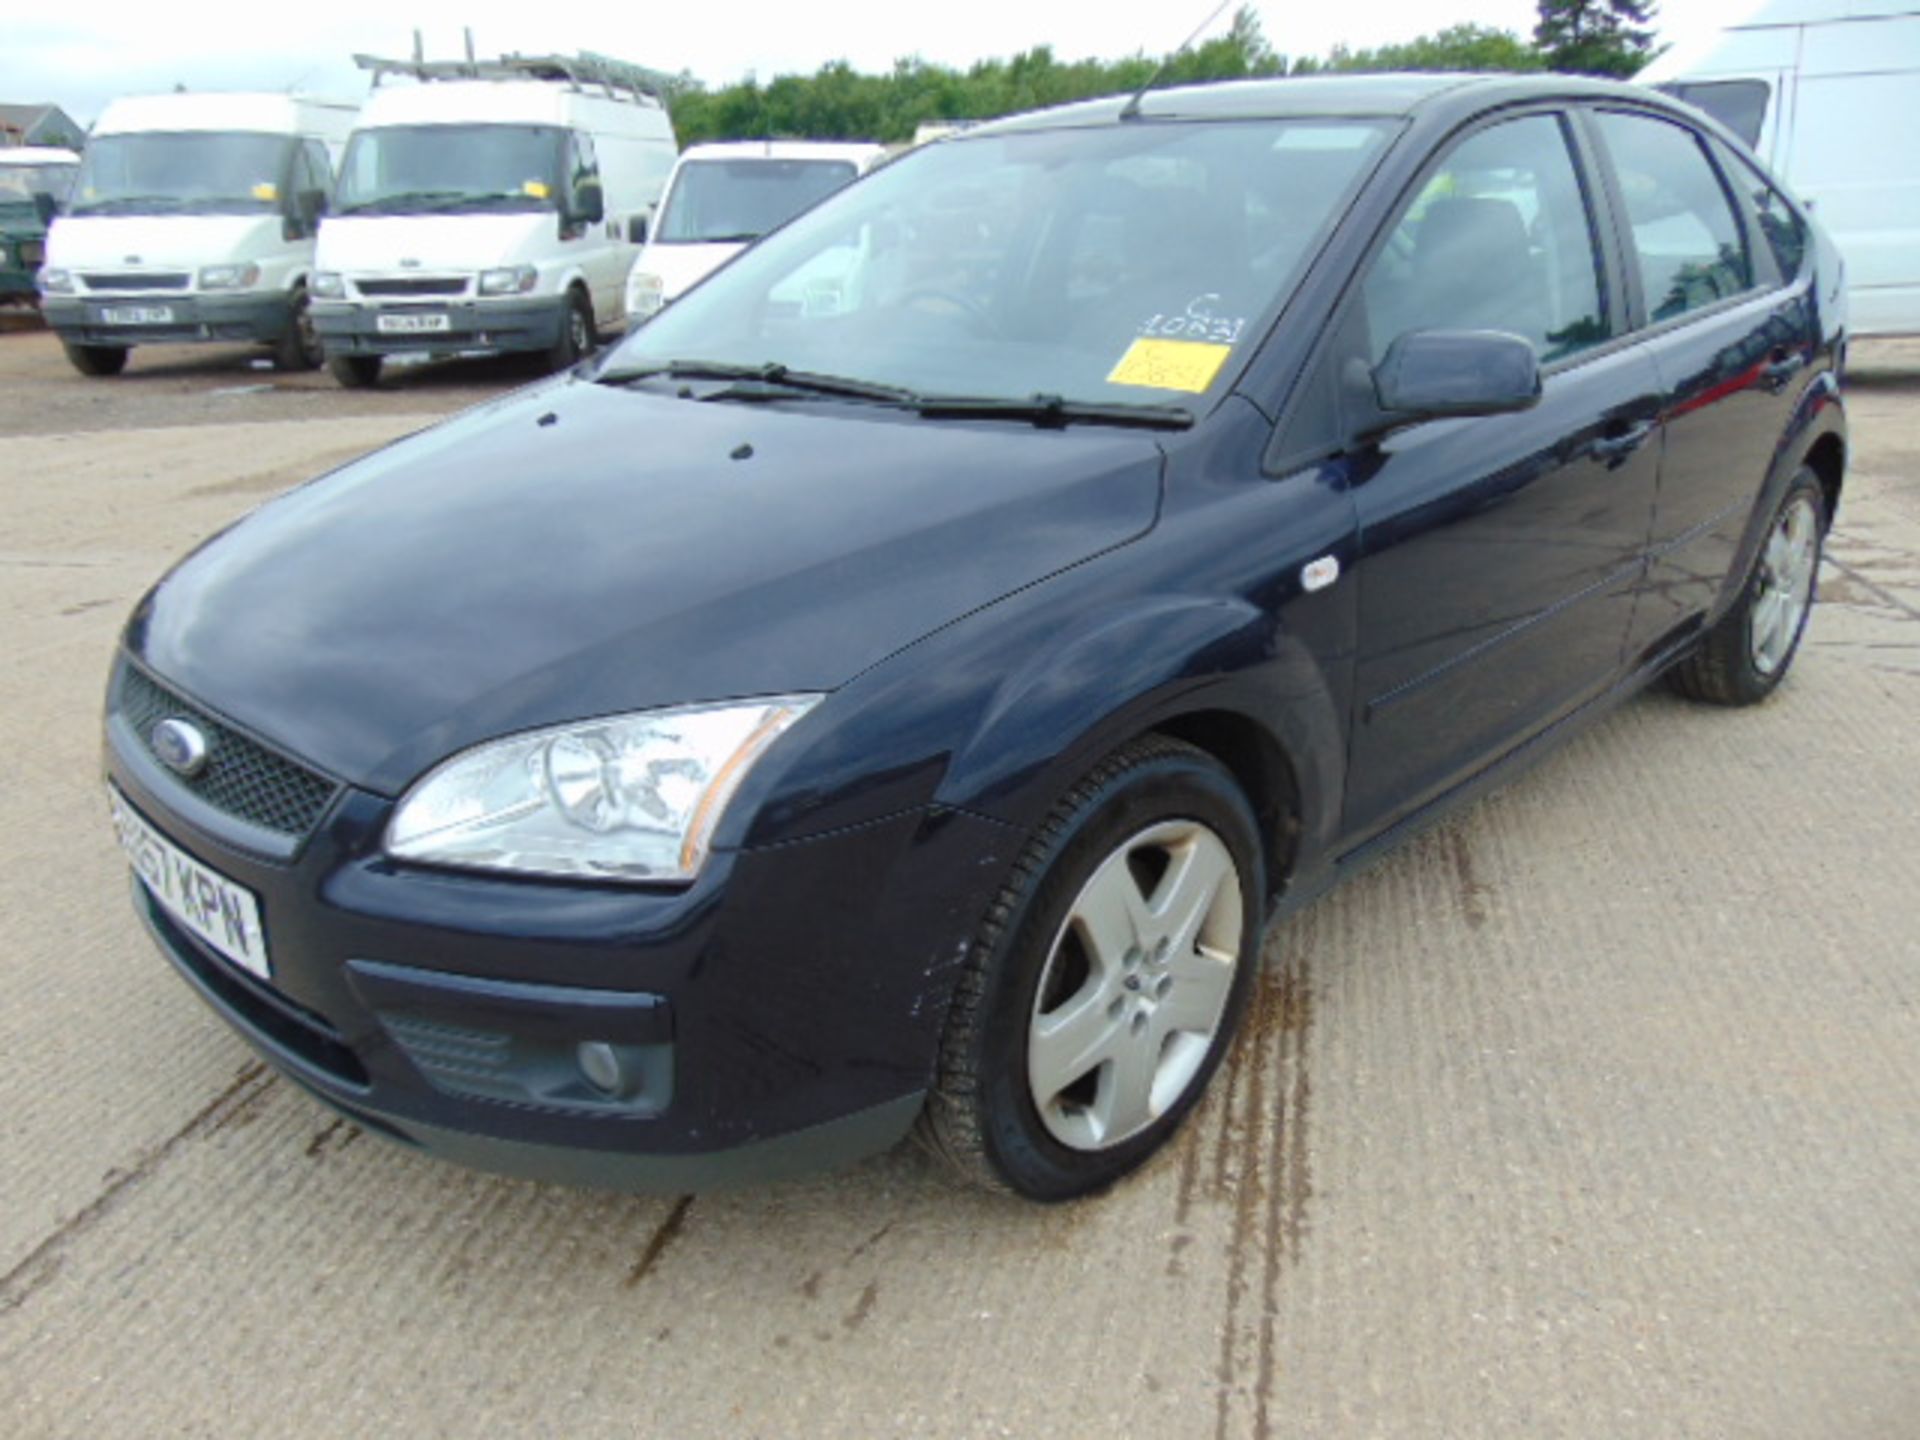 2008 Ford Focus 1.8 TDCI Style Hatchback - Image 3 of 18